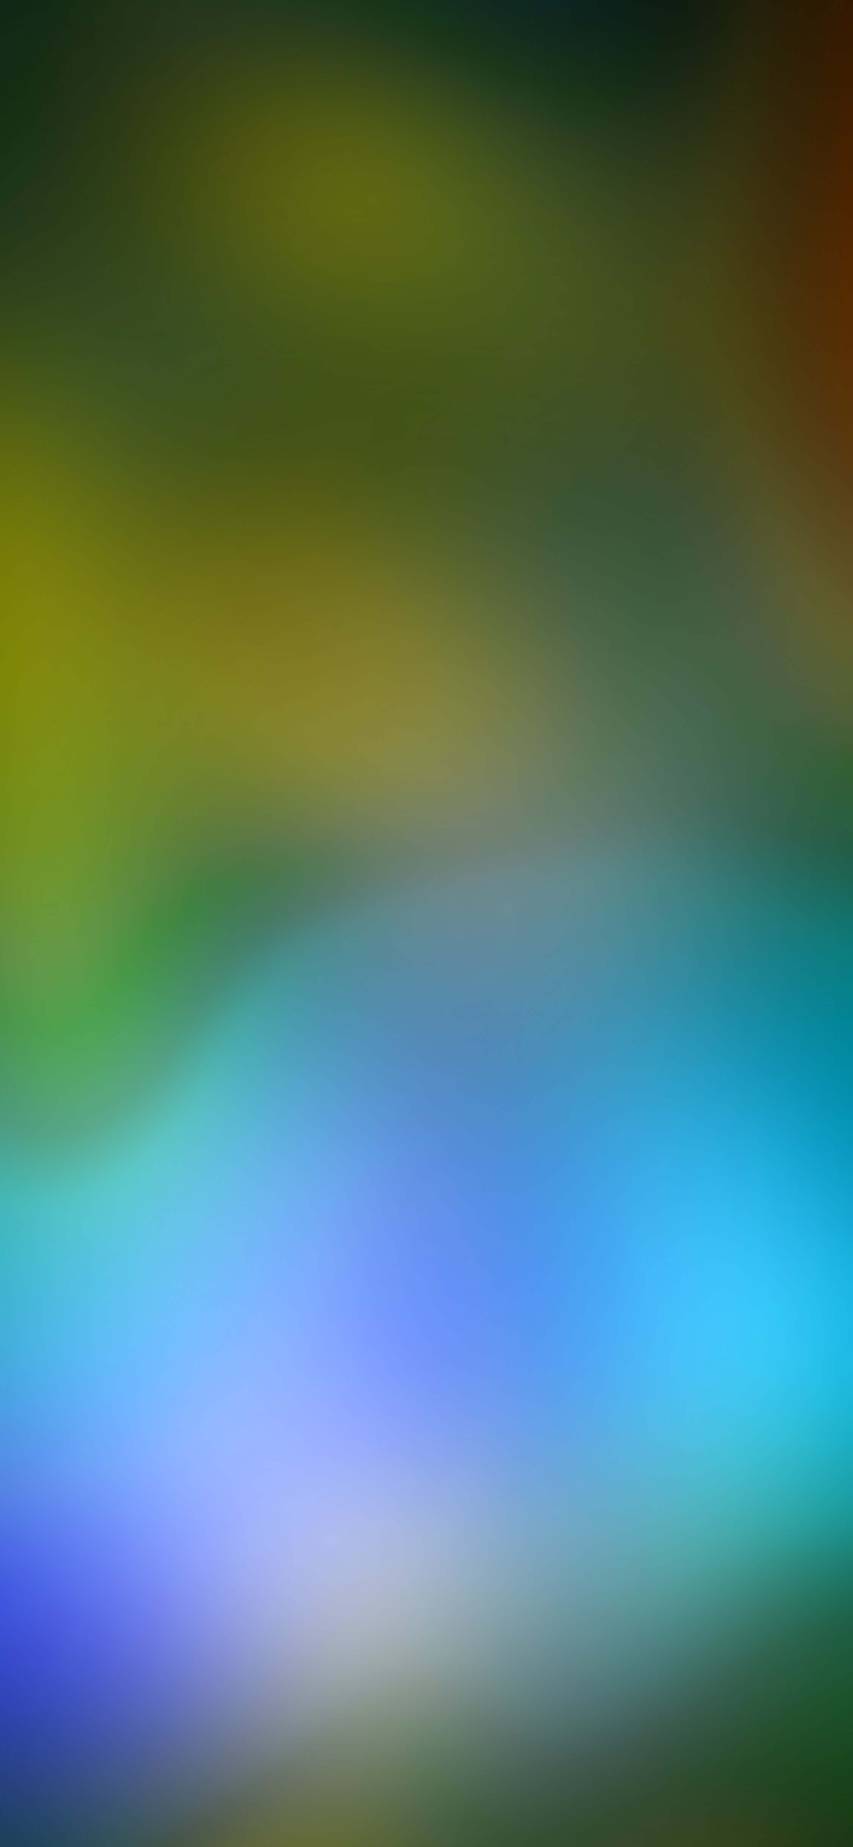 Colored free iPhone Wallpaper downloads